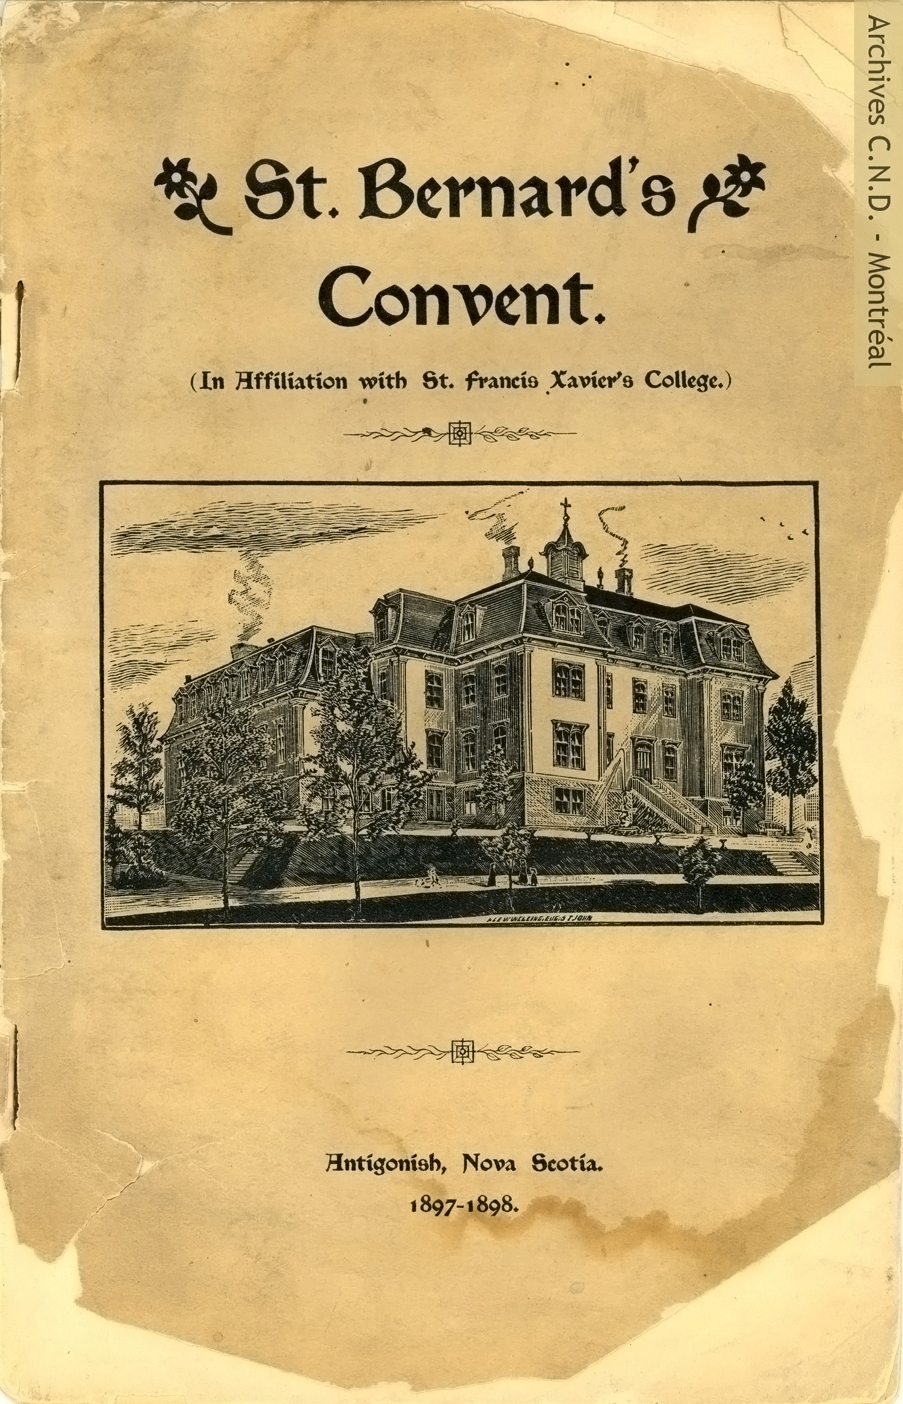 Cover and pages taken from a promotional booklet from Mount Saint Bernard Academy